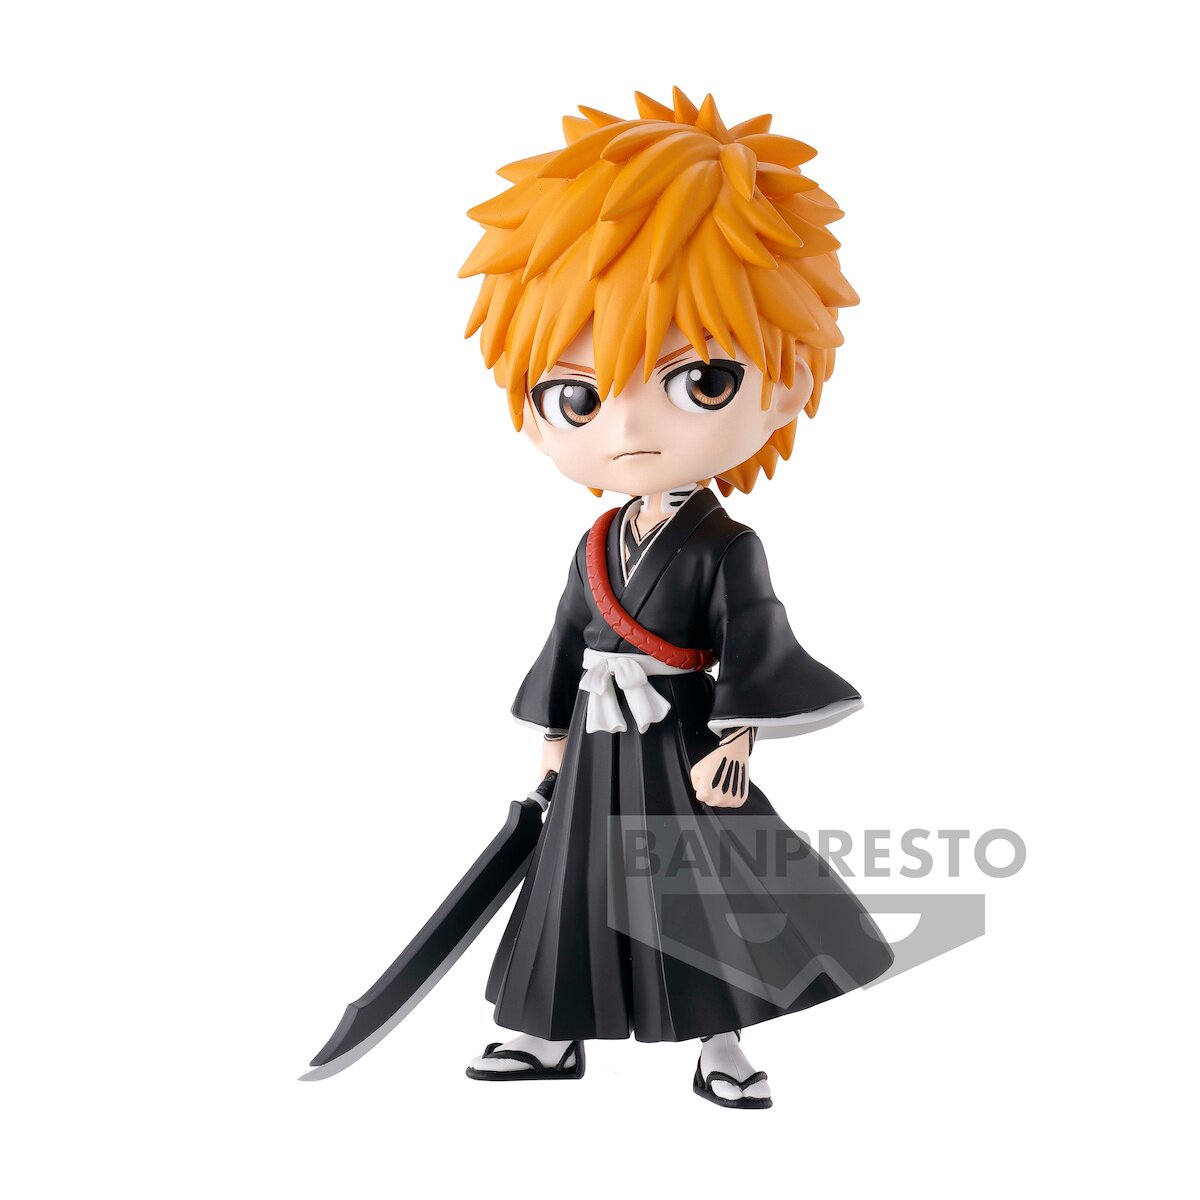 So I found this fake bleach merchandise and thought this looked funny : r/ bleach